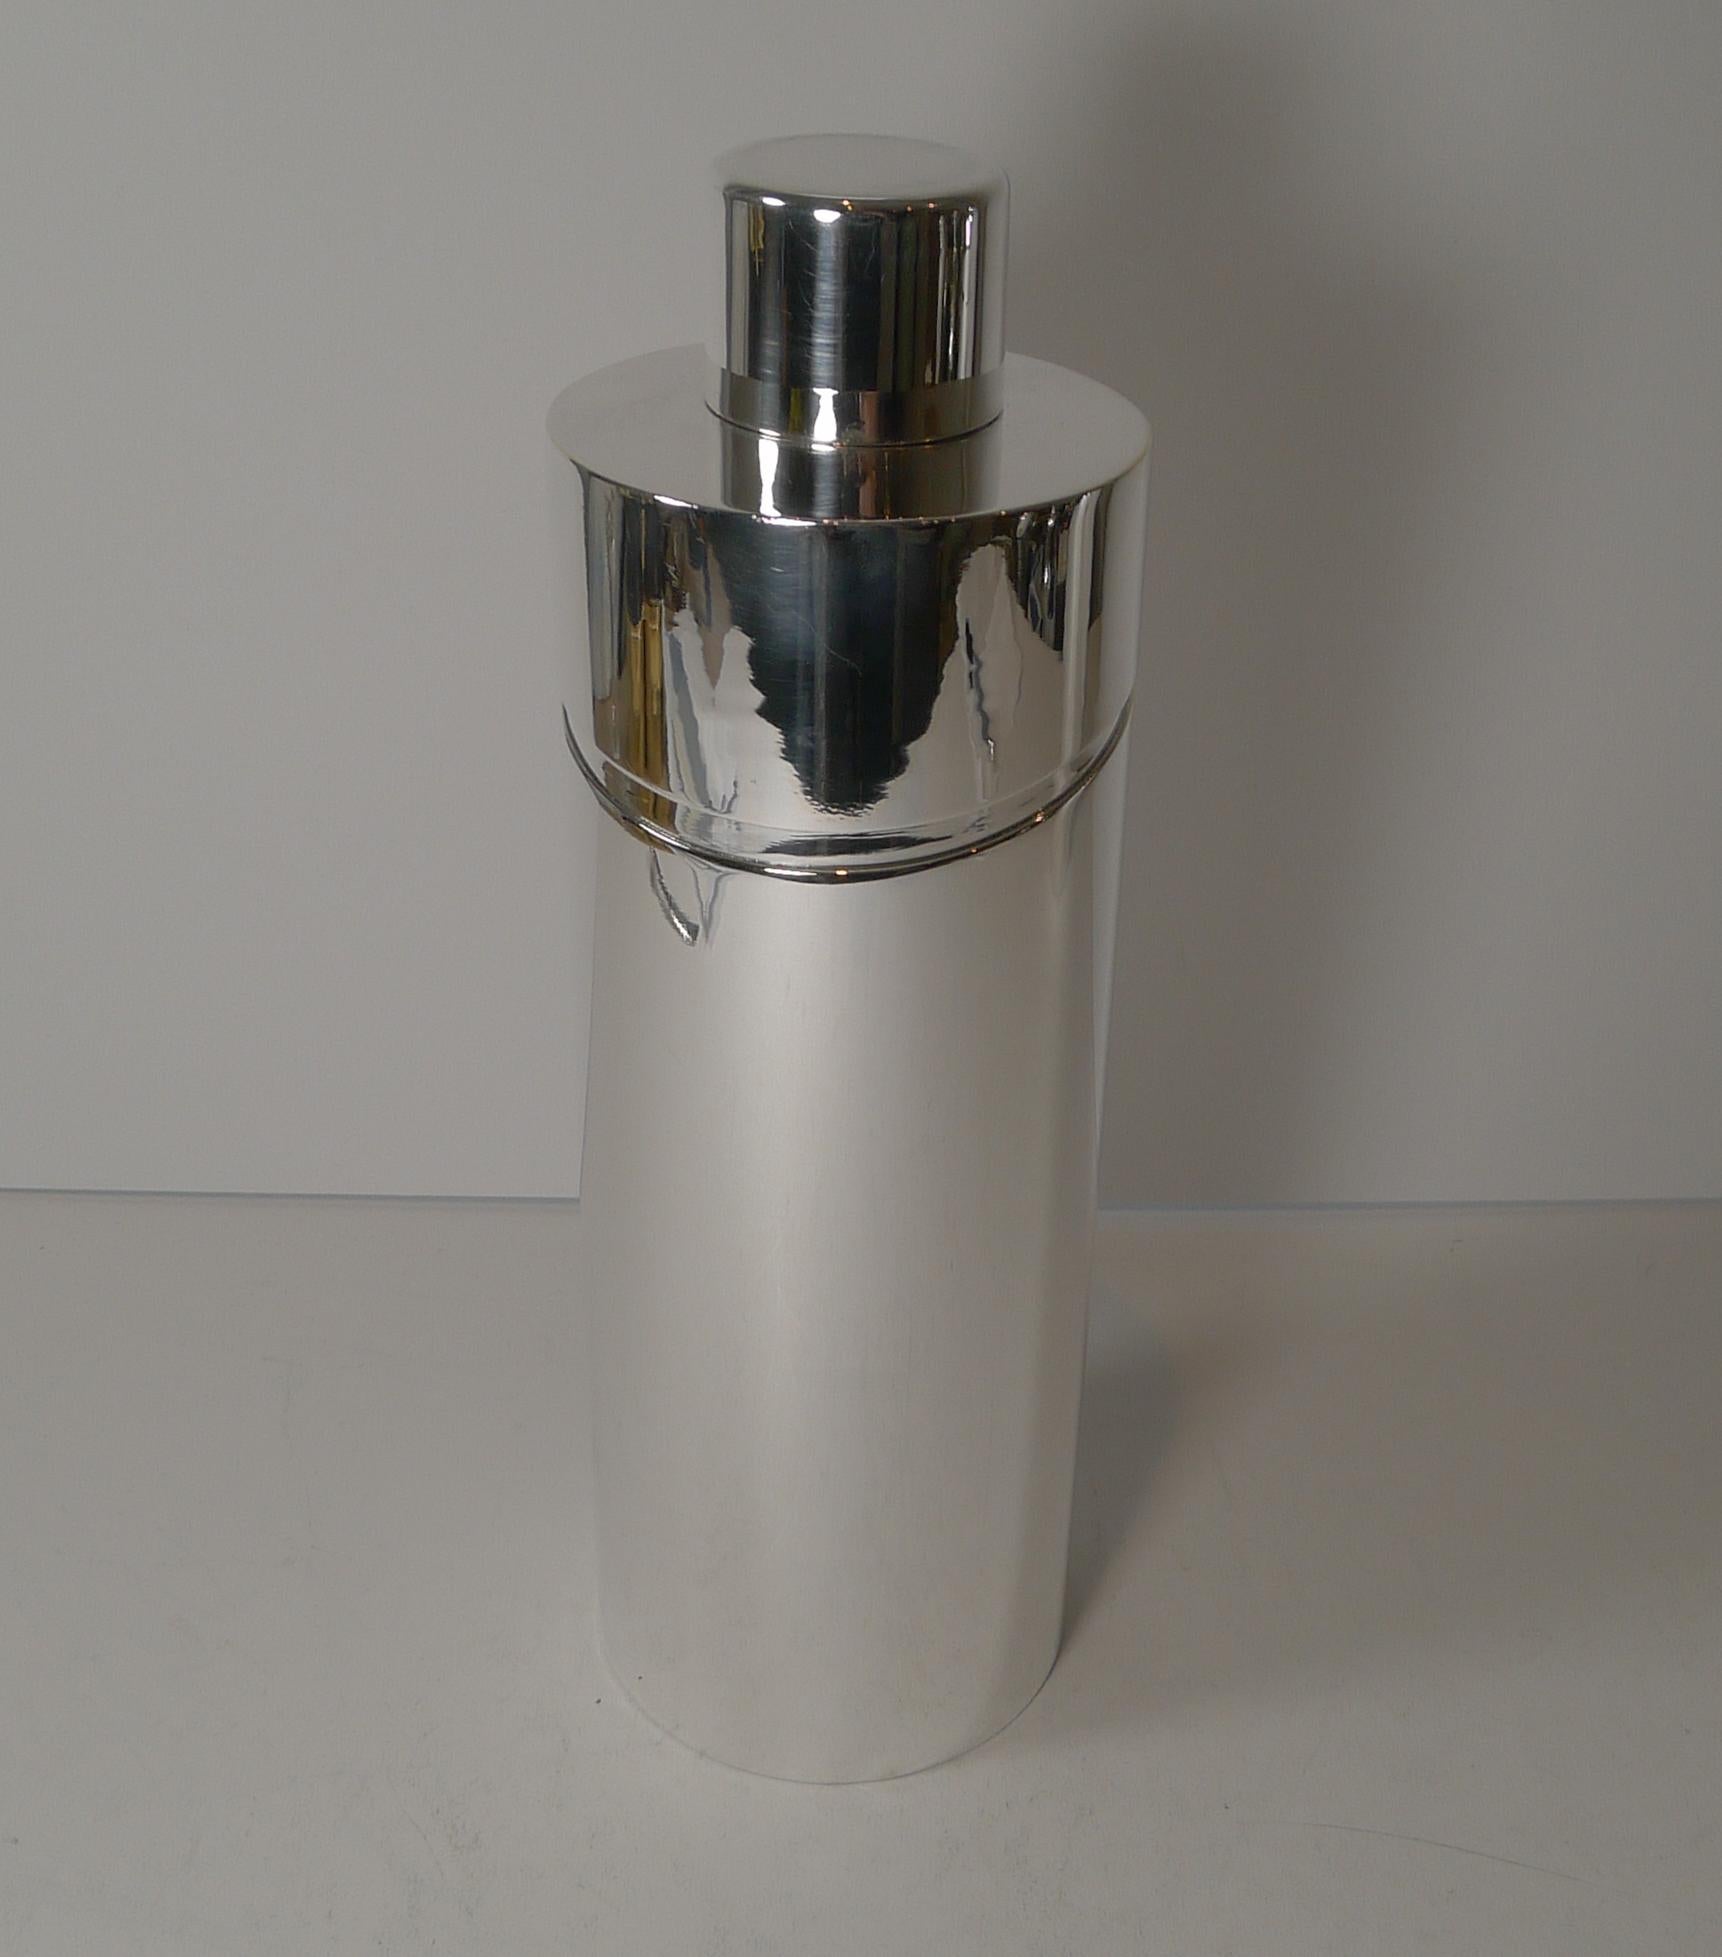 A stunning modernist cocktail shaker designed by the world famous Lion Sabattini for famous Orfevrerie Christofle, a magical combination of quality and minimalist design.

Created as part of the Gallia range, the design is known as Windsor and was